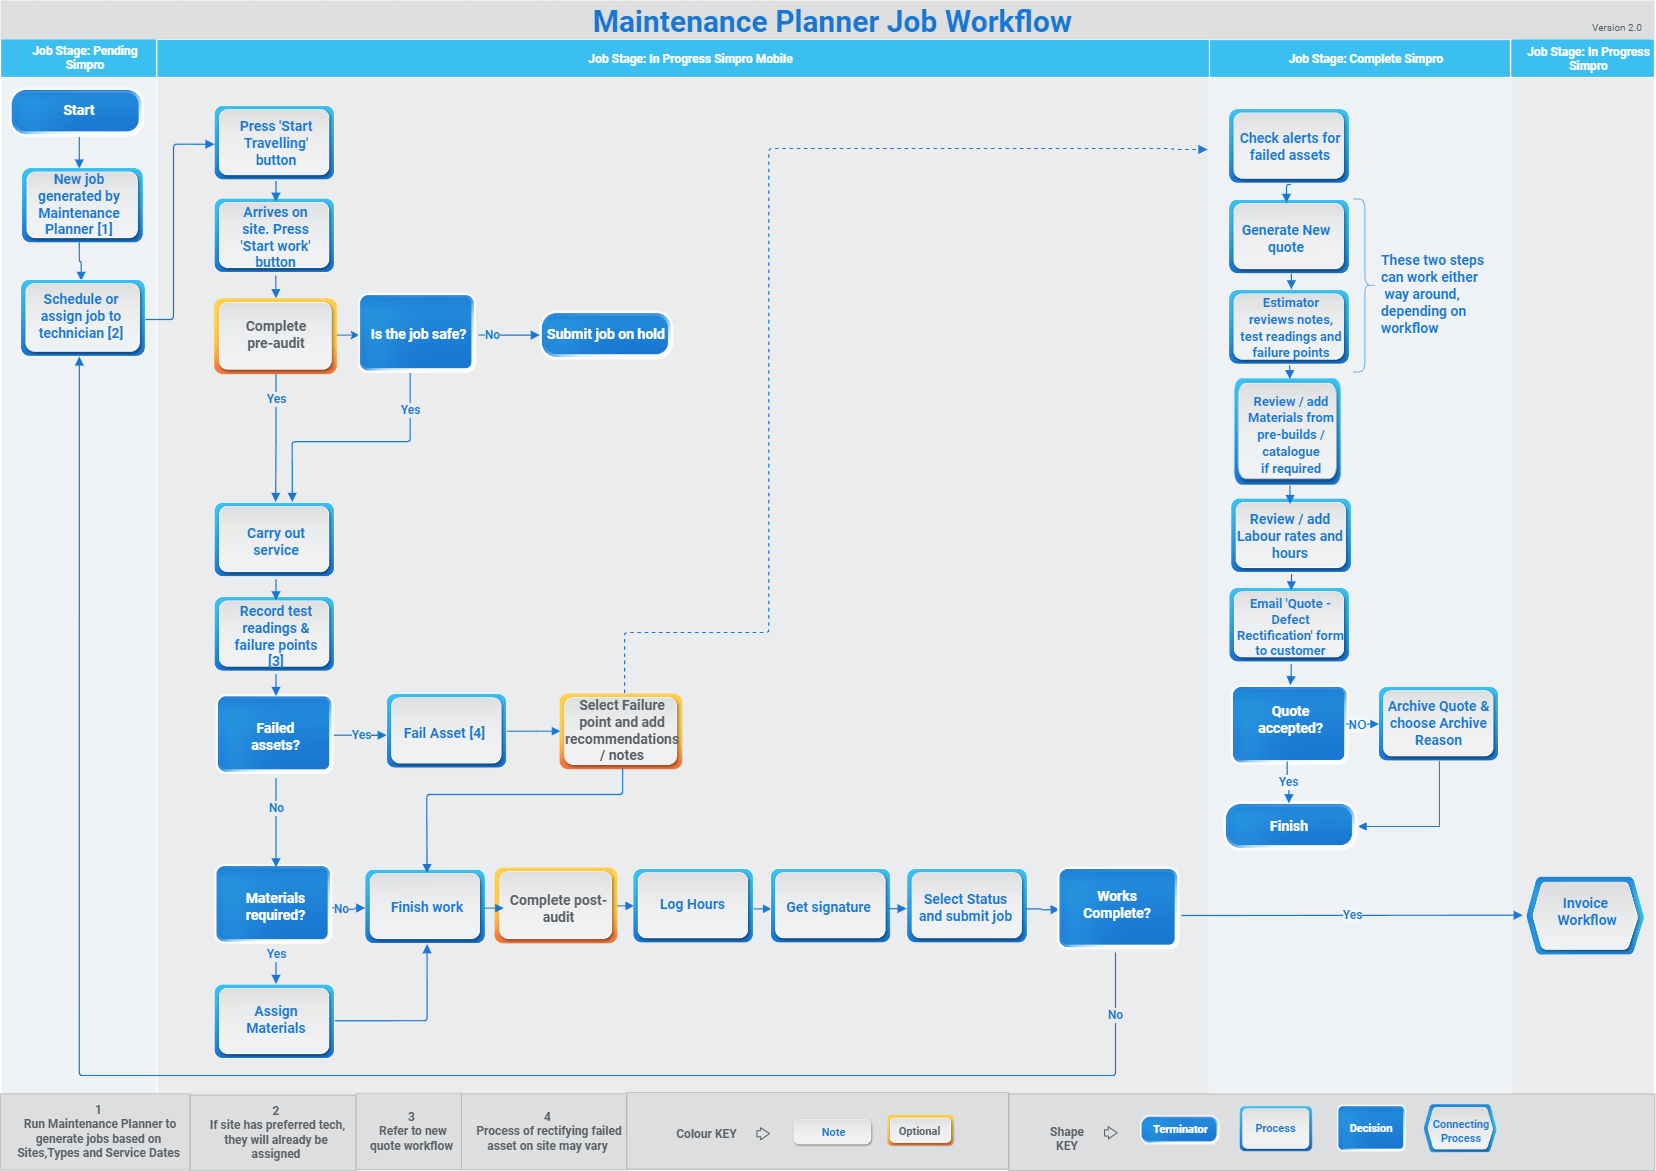 A screenshot of a workflow diagram for completing a Maintenance Planner job.